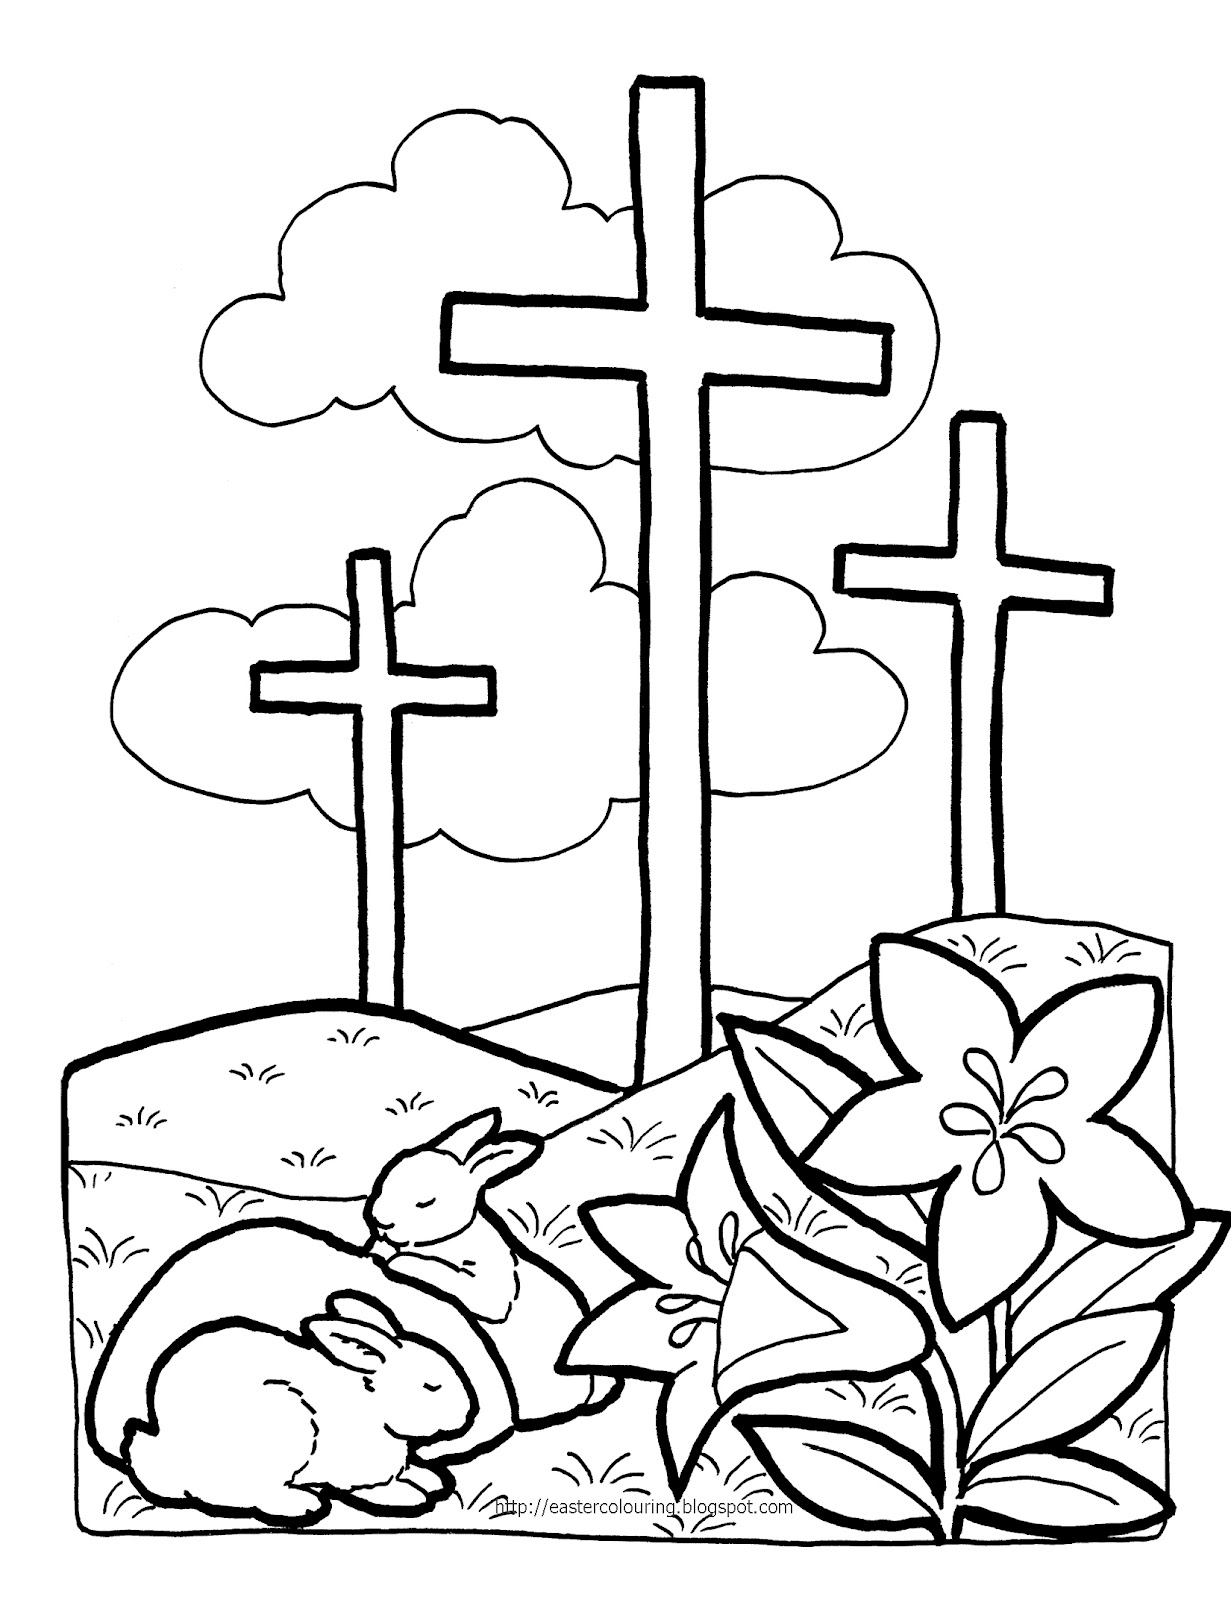 religious clipart for easter sunday - photo #46